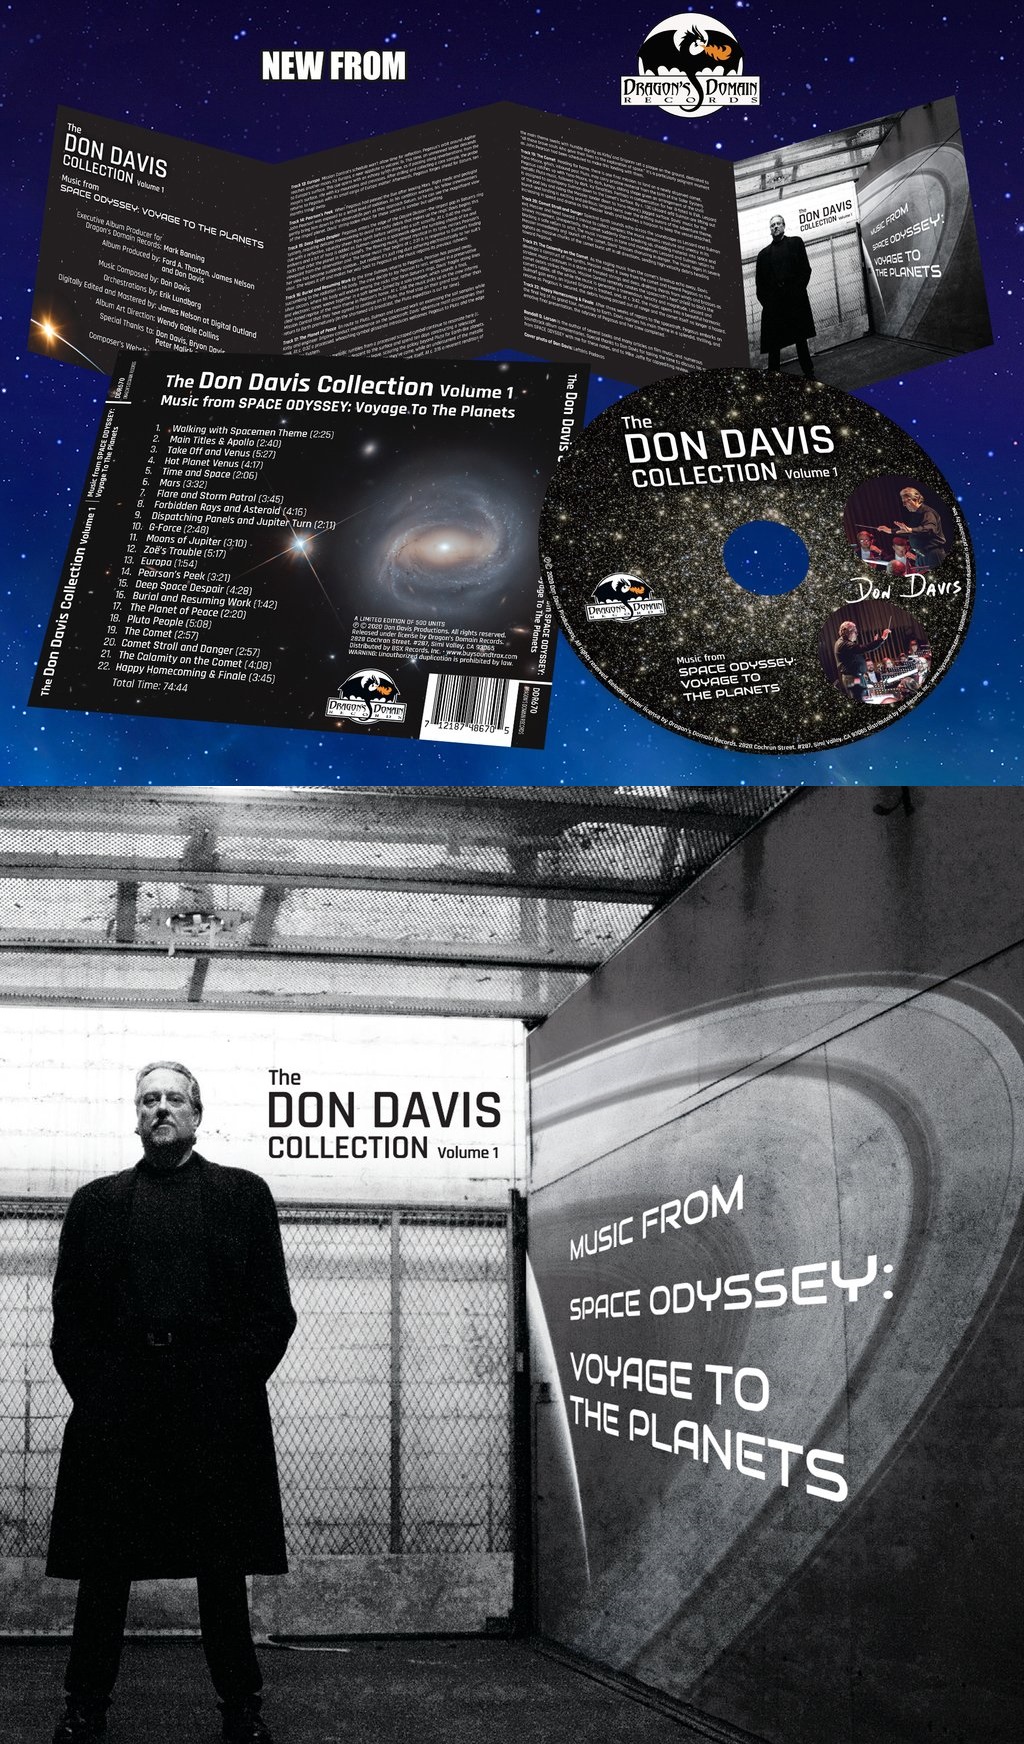 Music From Space Odyssey: Voyage To The Planets (The Don Davis Collection: Volume 1) 